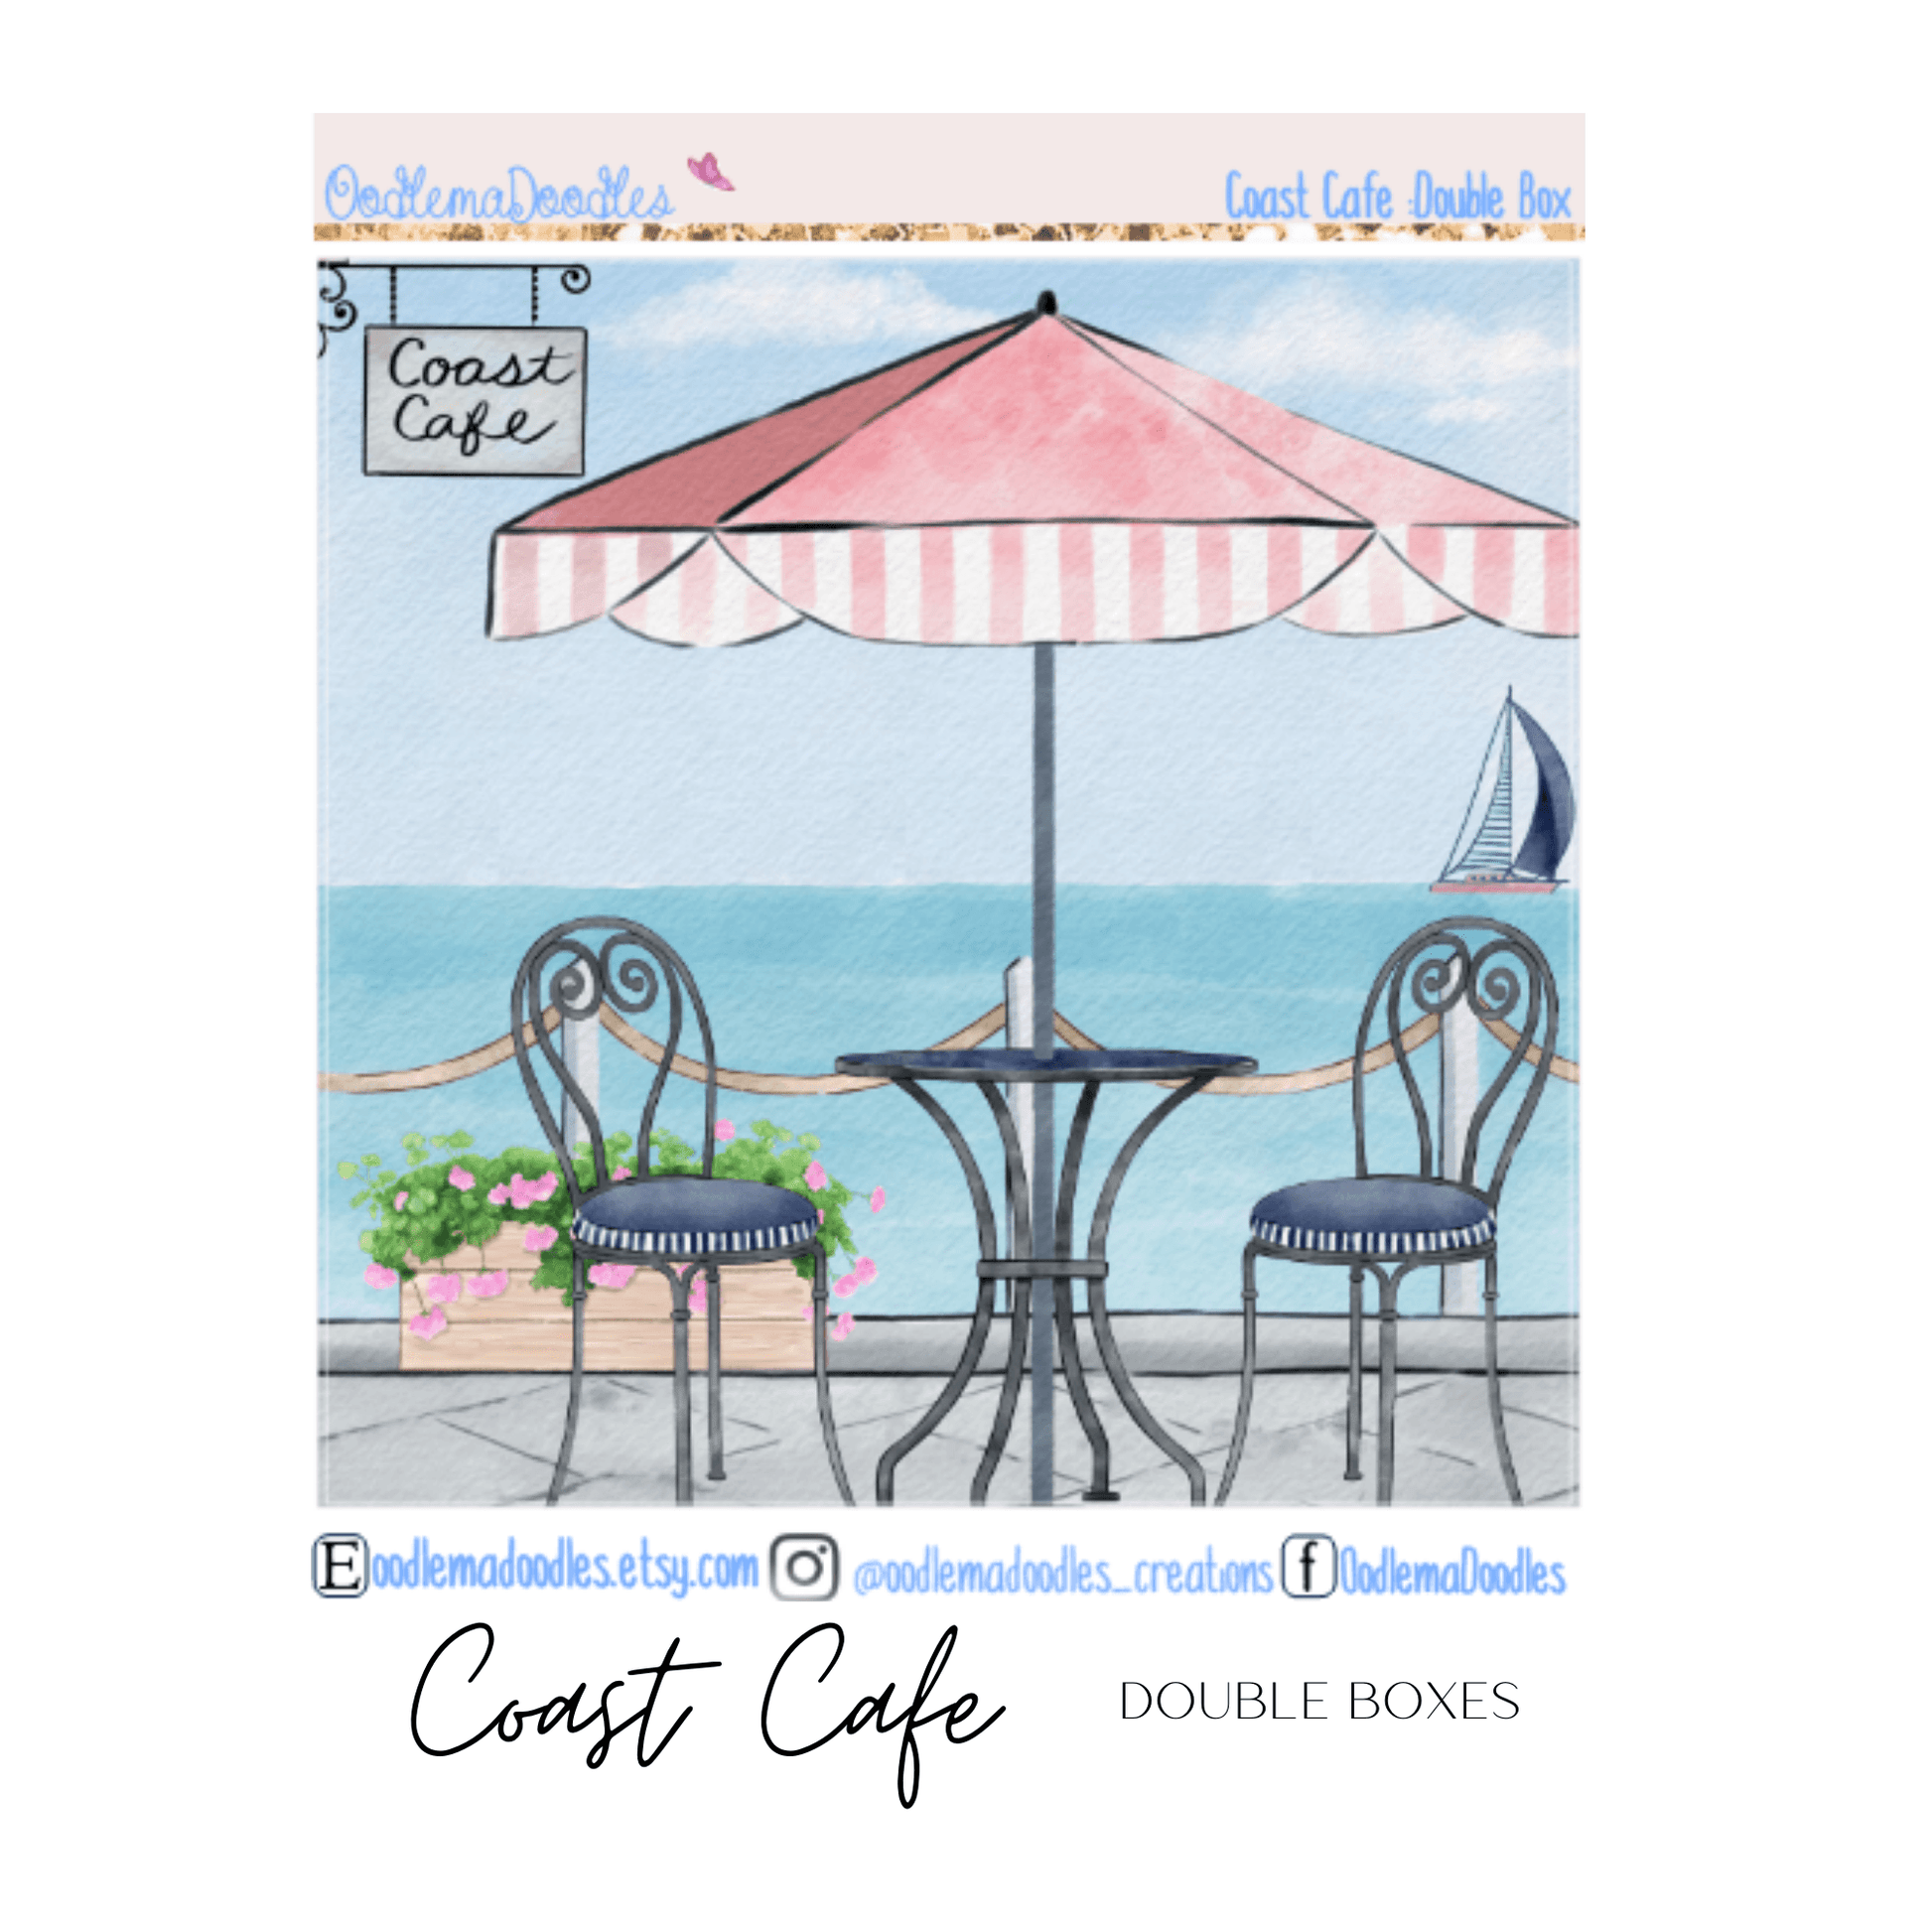 Coast Cafe Decorative Double Box Sticker - oodlemadoodles